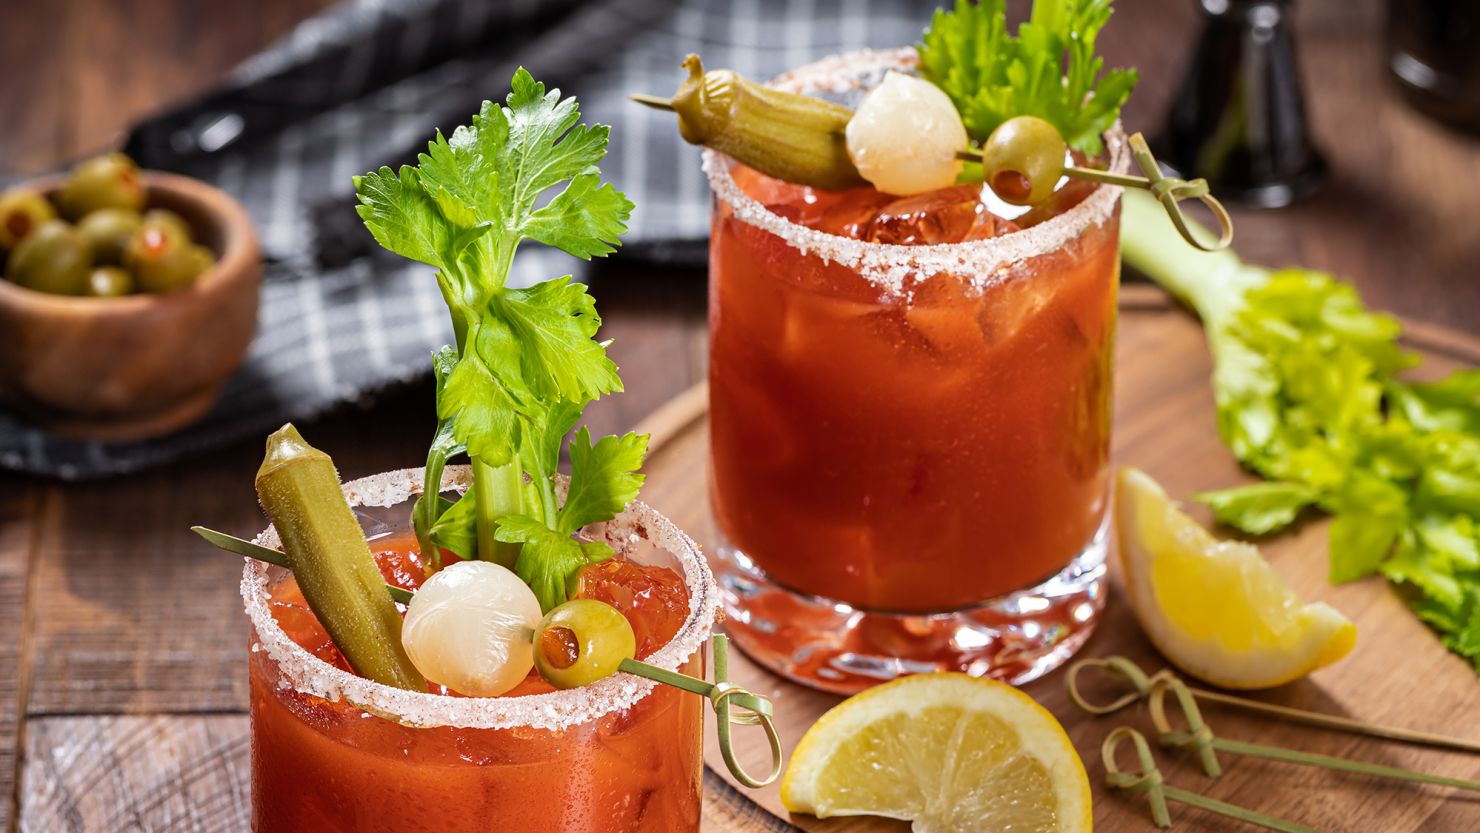 January 1 is National Bloody Mary Day. However, the tomato juice and vodka cocktails are typically consumed before the mid-afternoon.